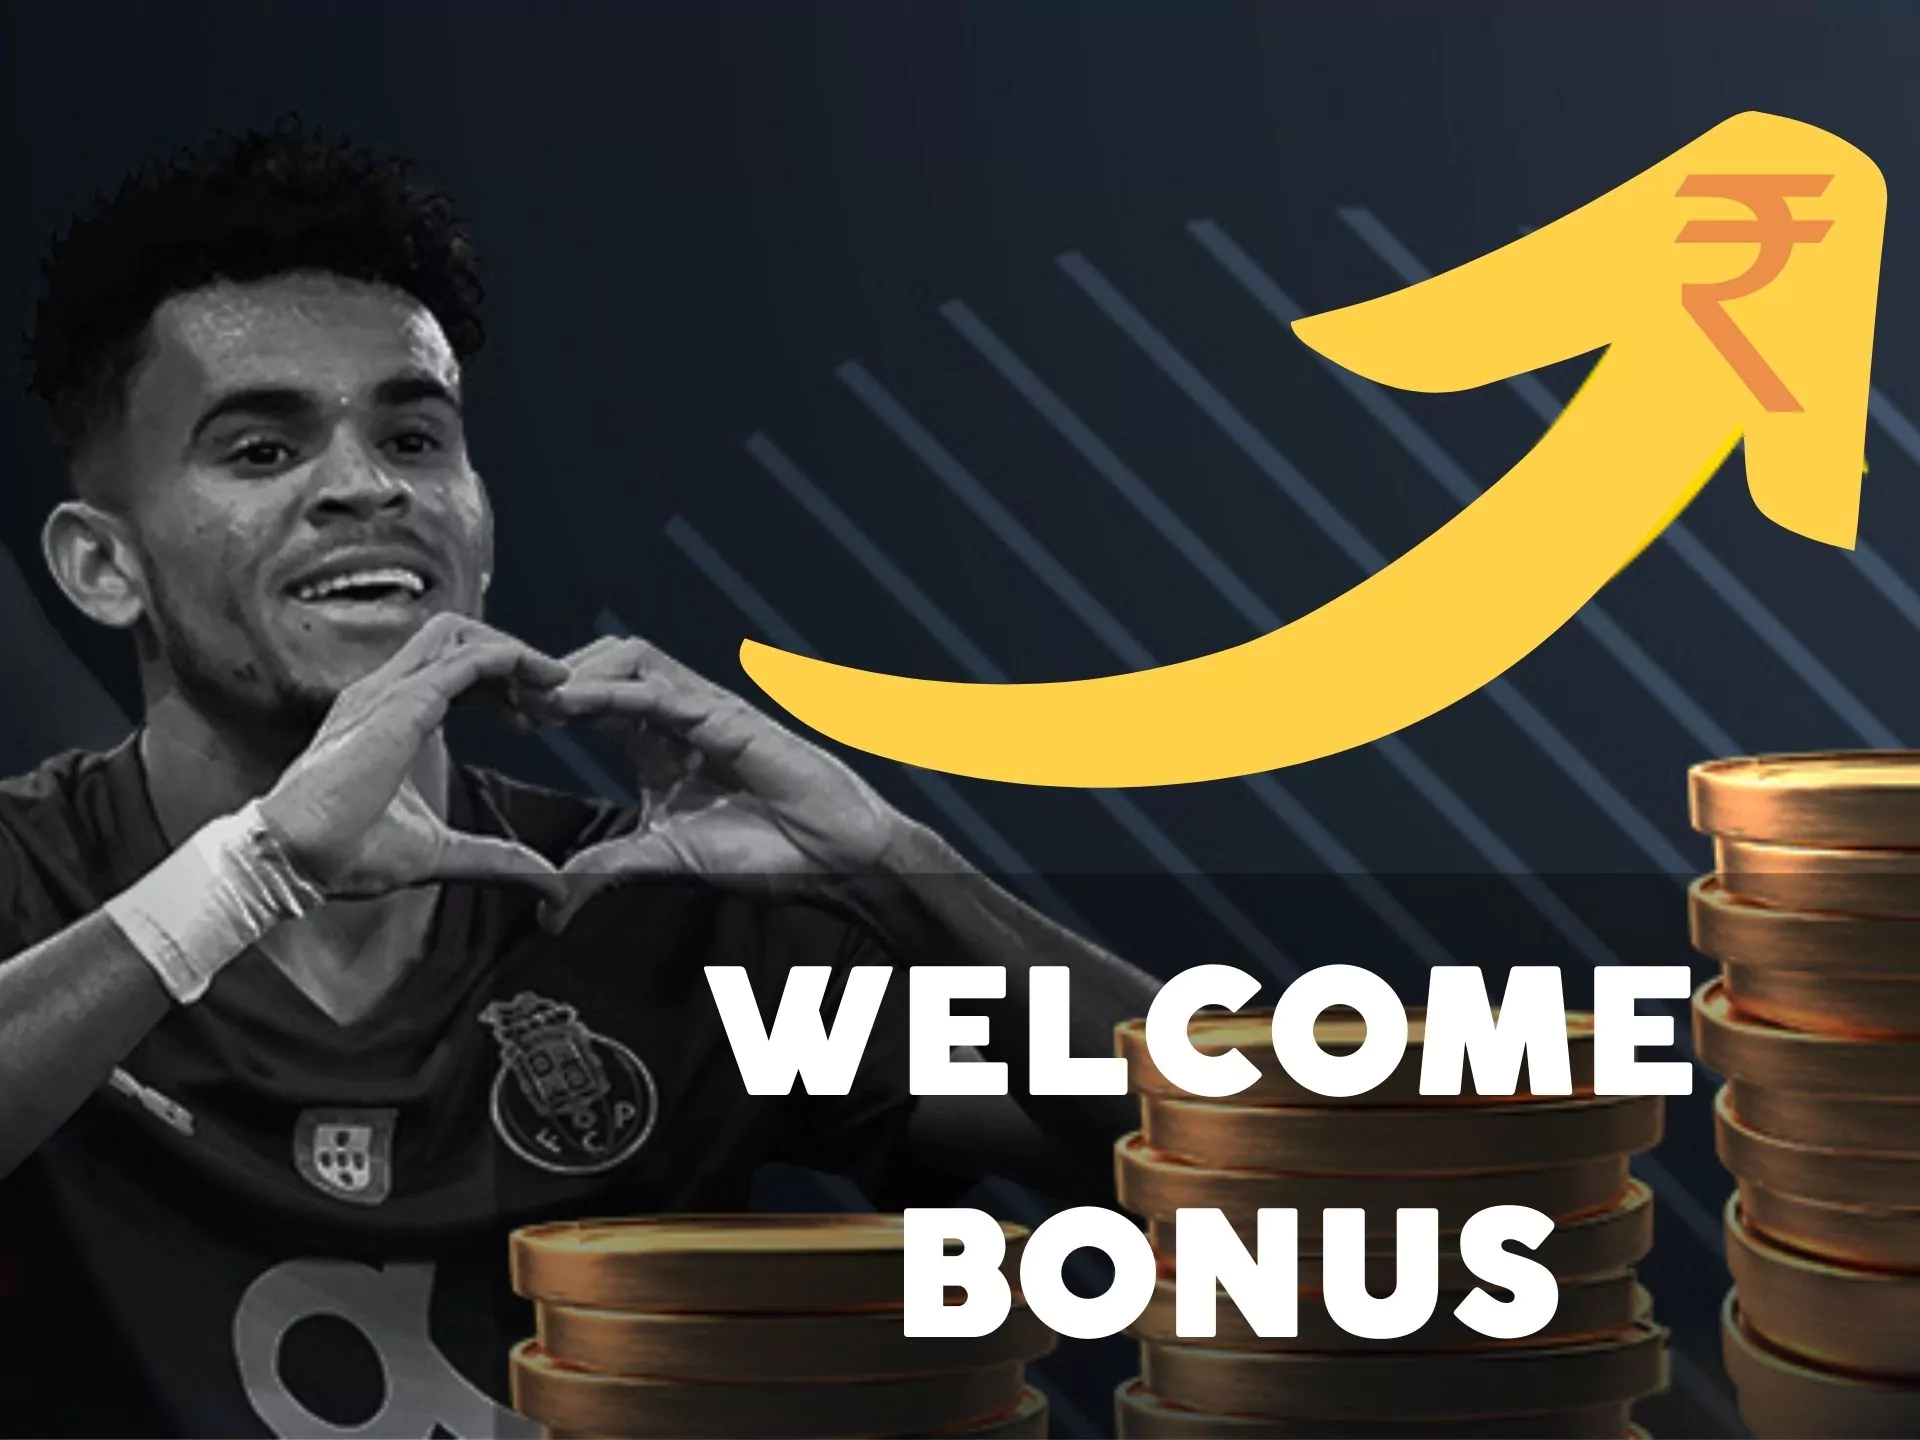 Get a welcome bonus of up to 100% to your first deposit.